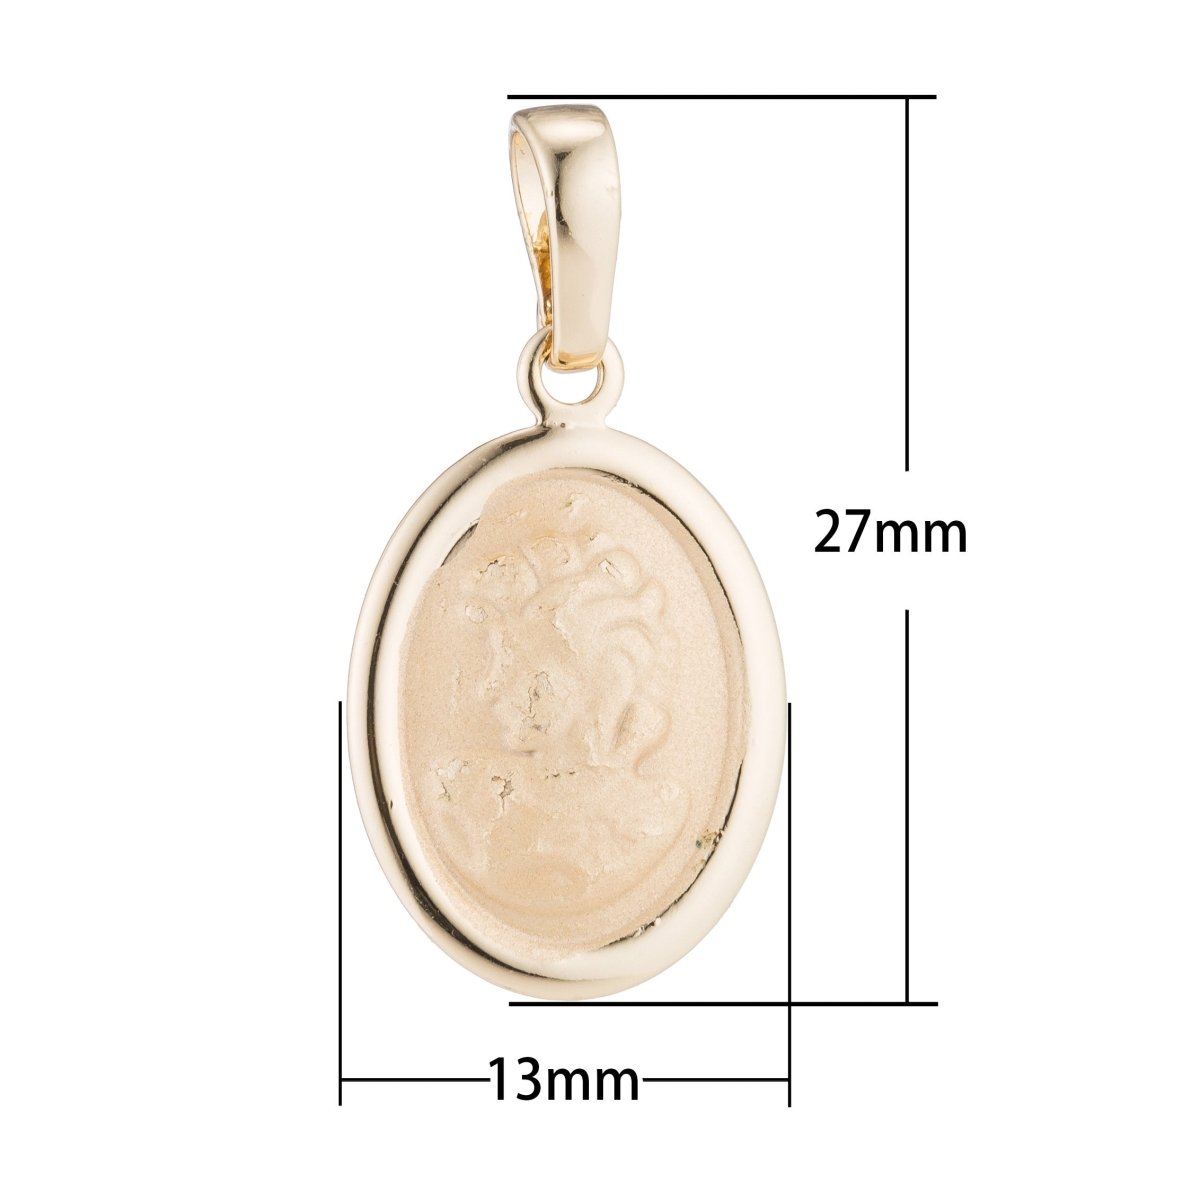 Gold Women Pendant, Woman Portrait, Golden Charm, Ladies, DIY, Crafting, Necklace Pendant Charm Bead Bails Findings for Jewelry Making H-480 - DLUXCA